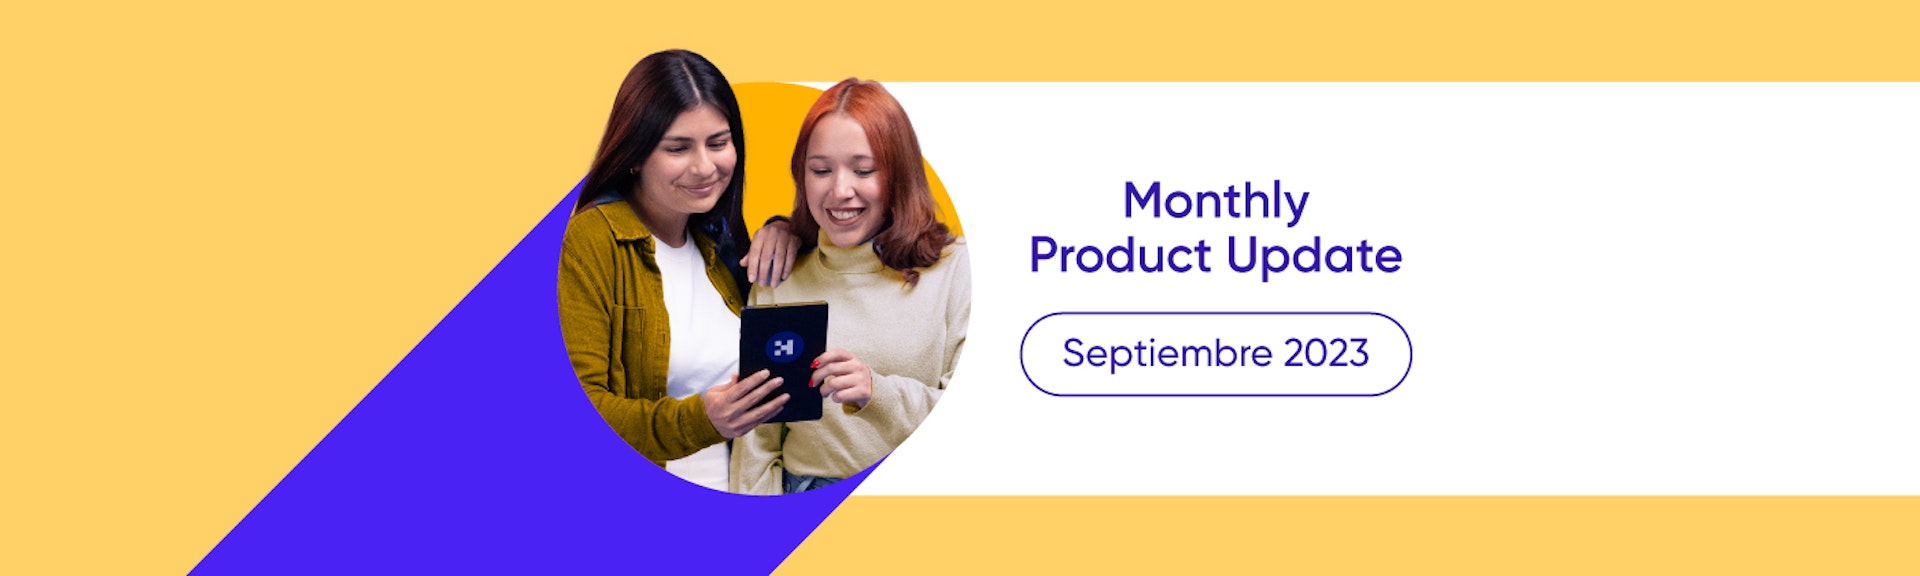 Monthly Product Update: Septiembre 2023